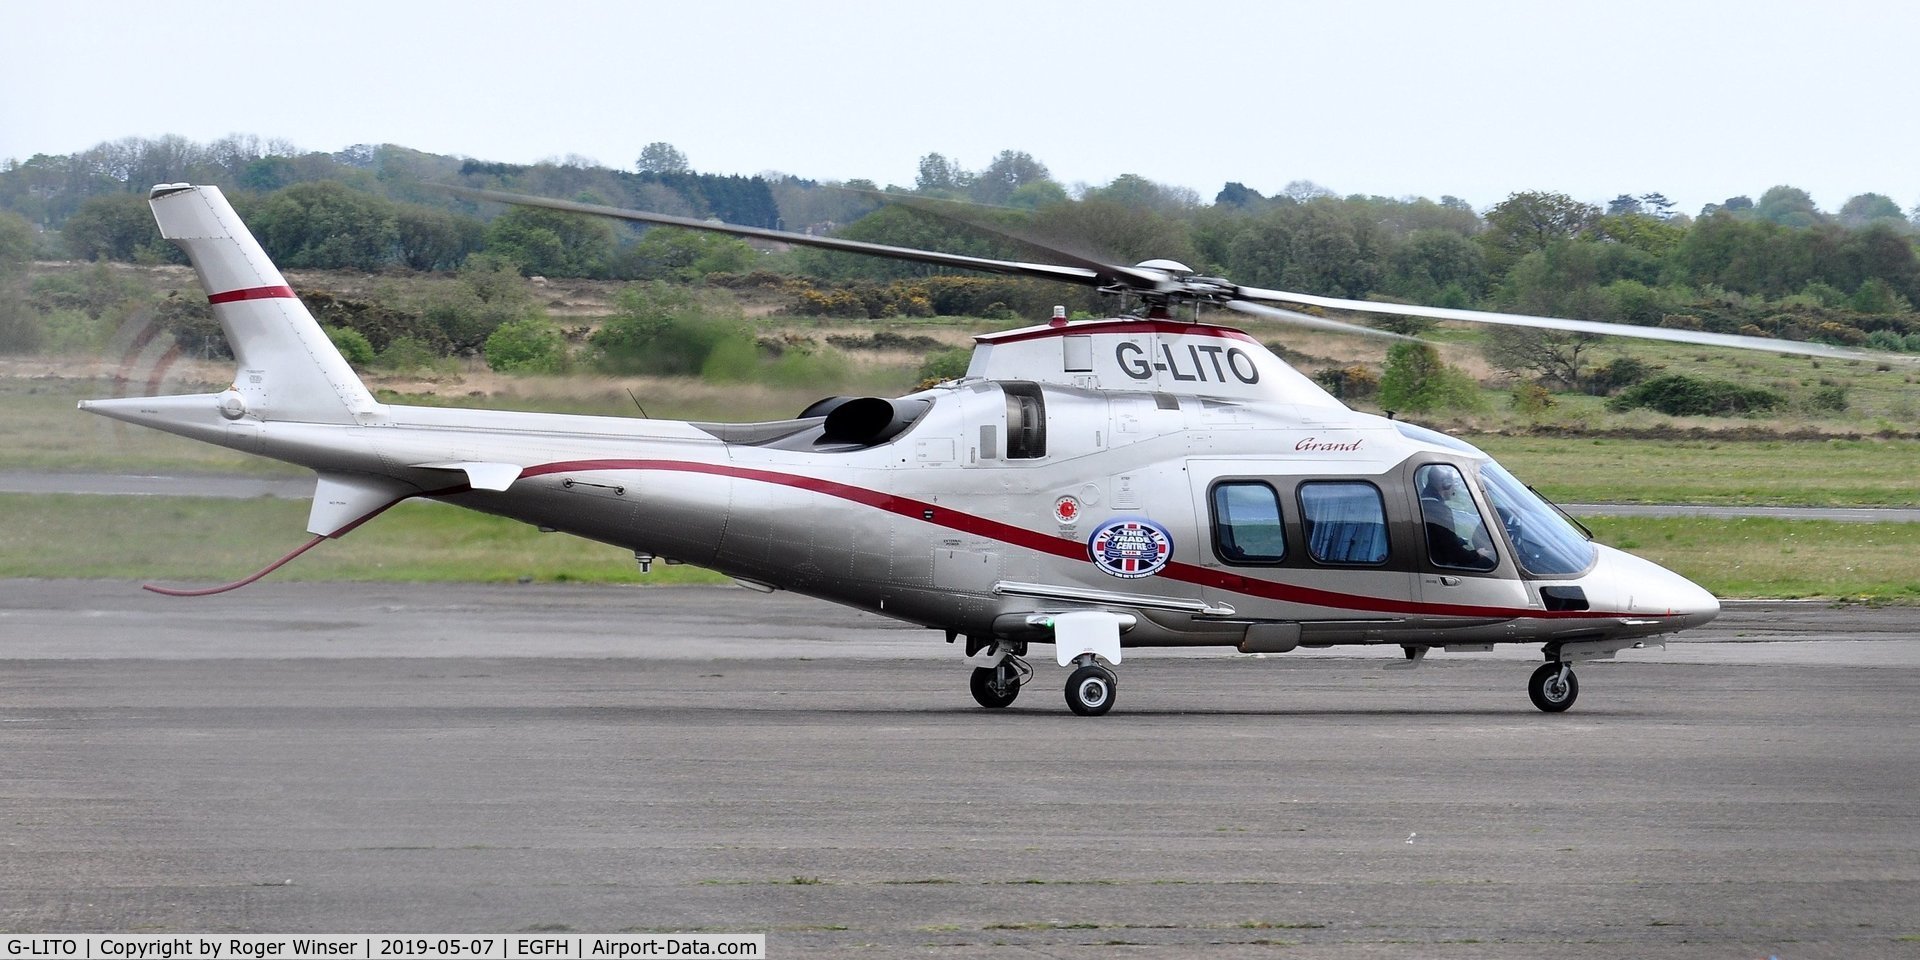 G-LITO, 2006 Agusta A109S Grand C/N 22015, Visiting A-109S Grand operated by Castle Air as Castle 6.